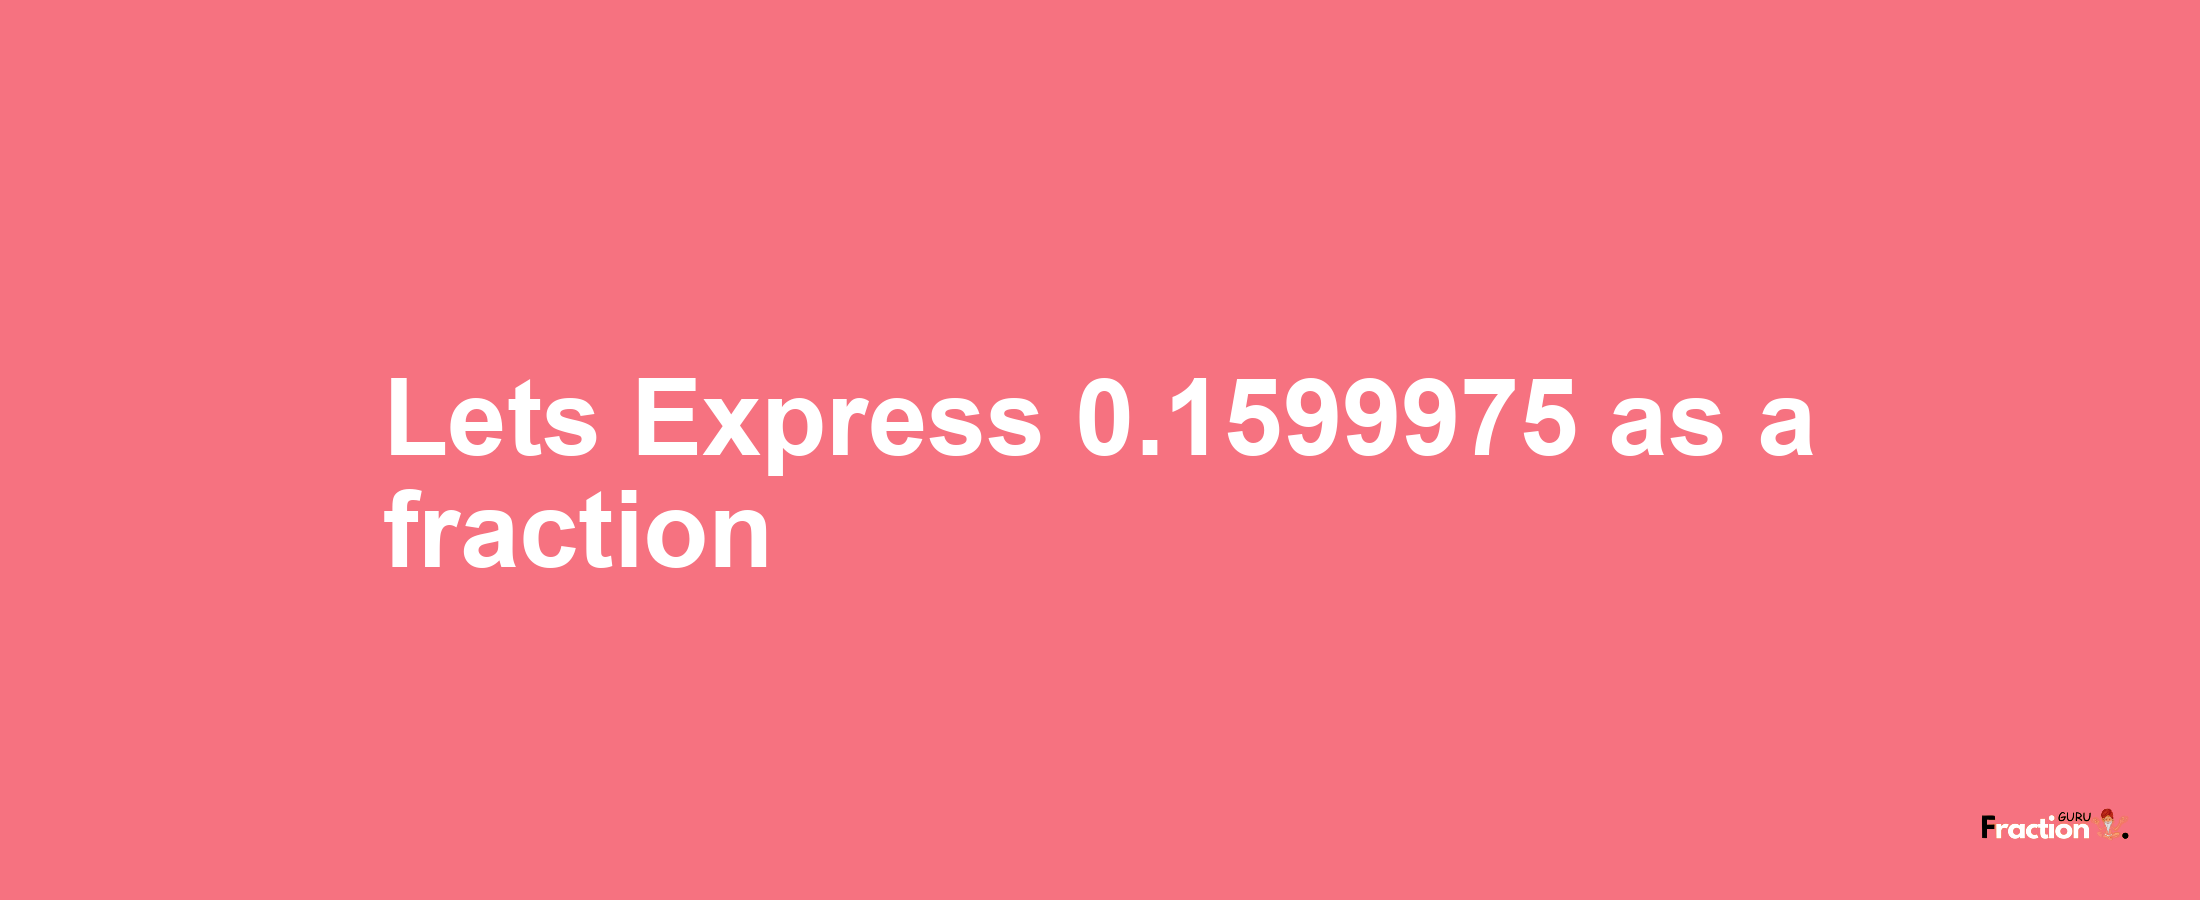 Lets Express 0.1599975 as afraction